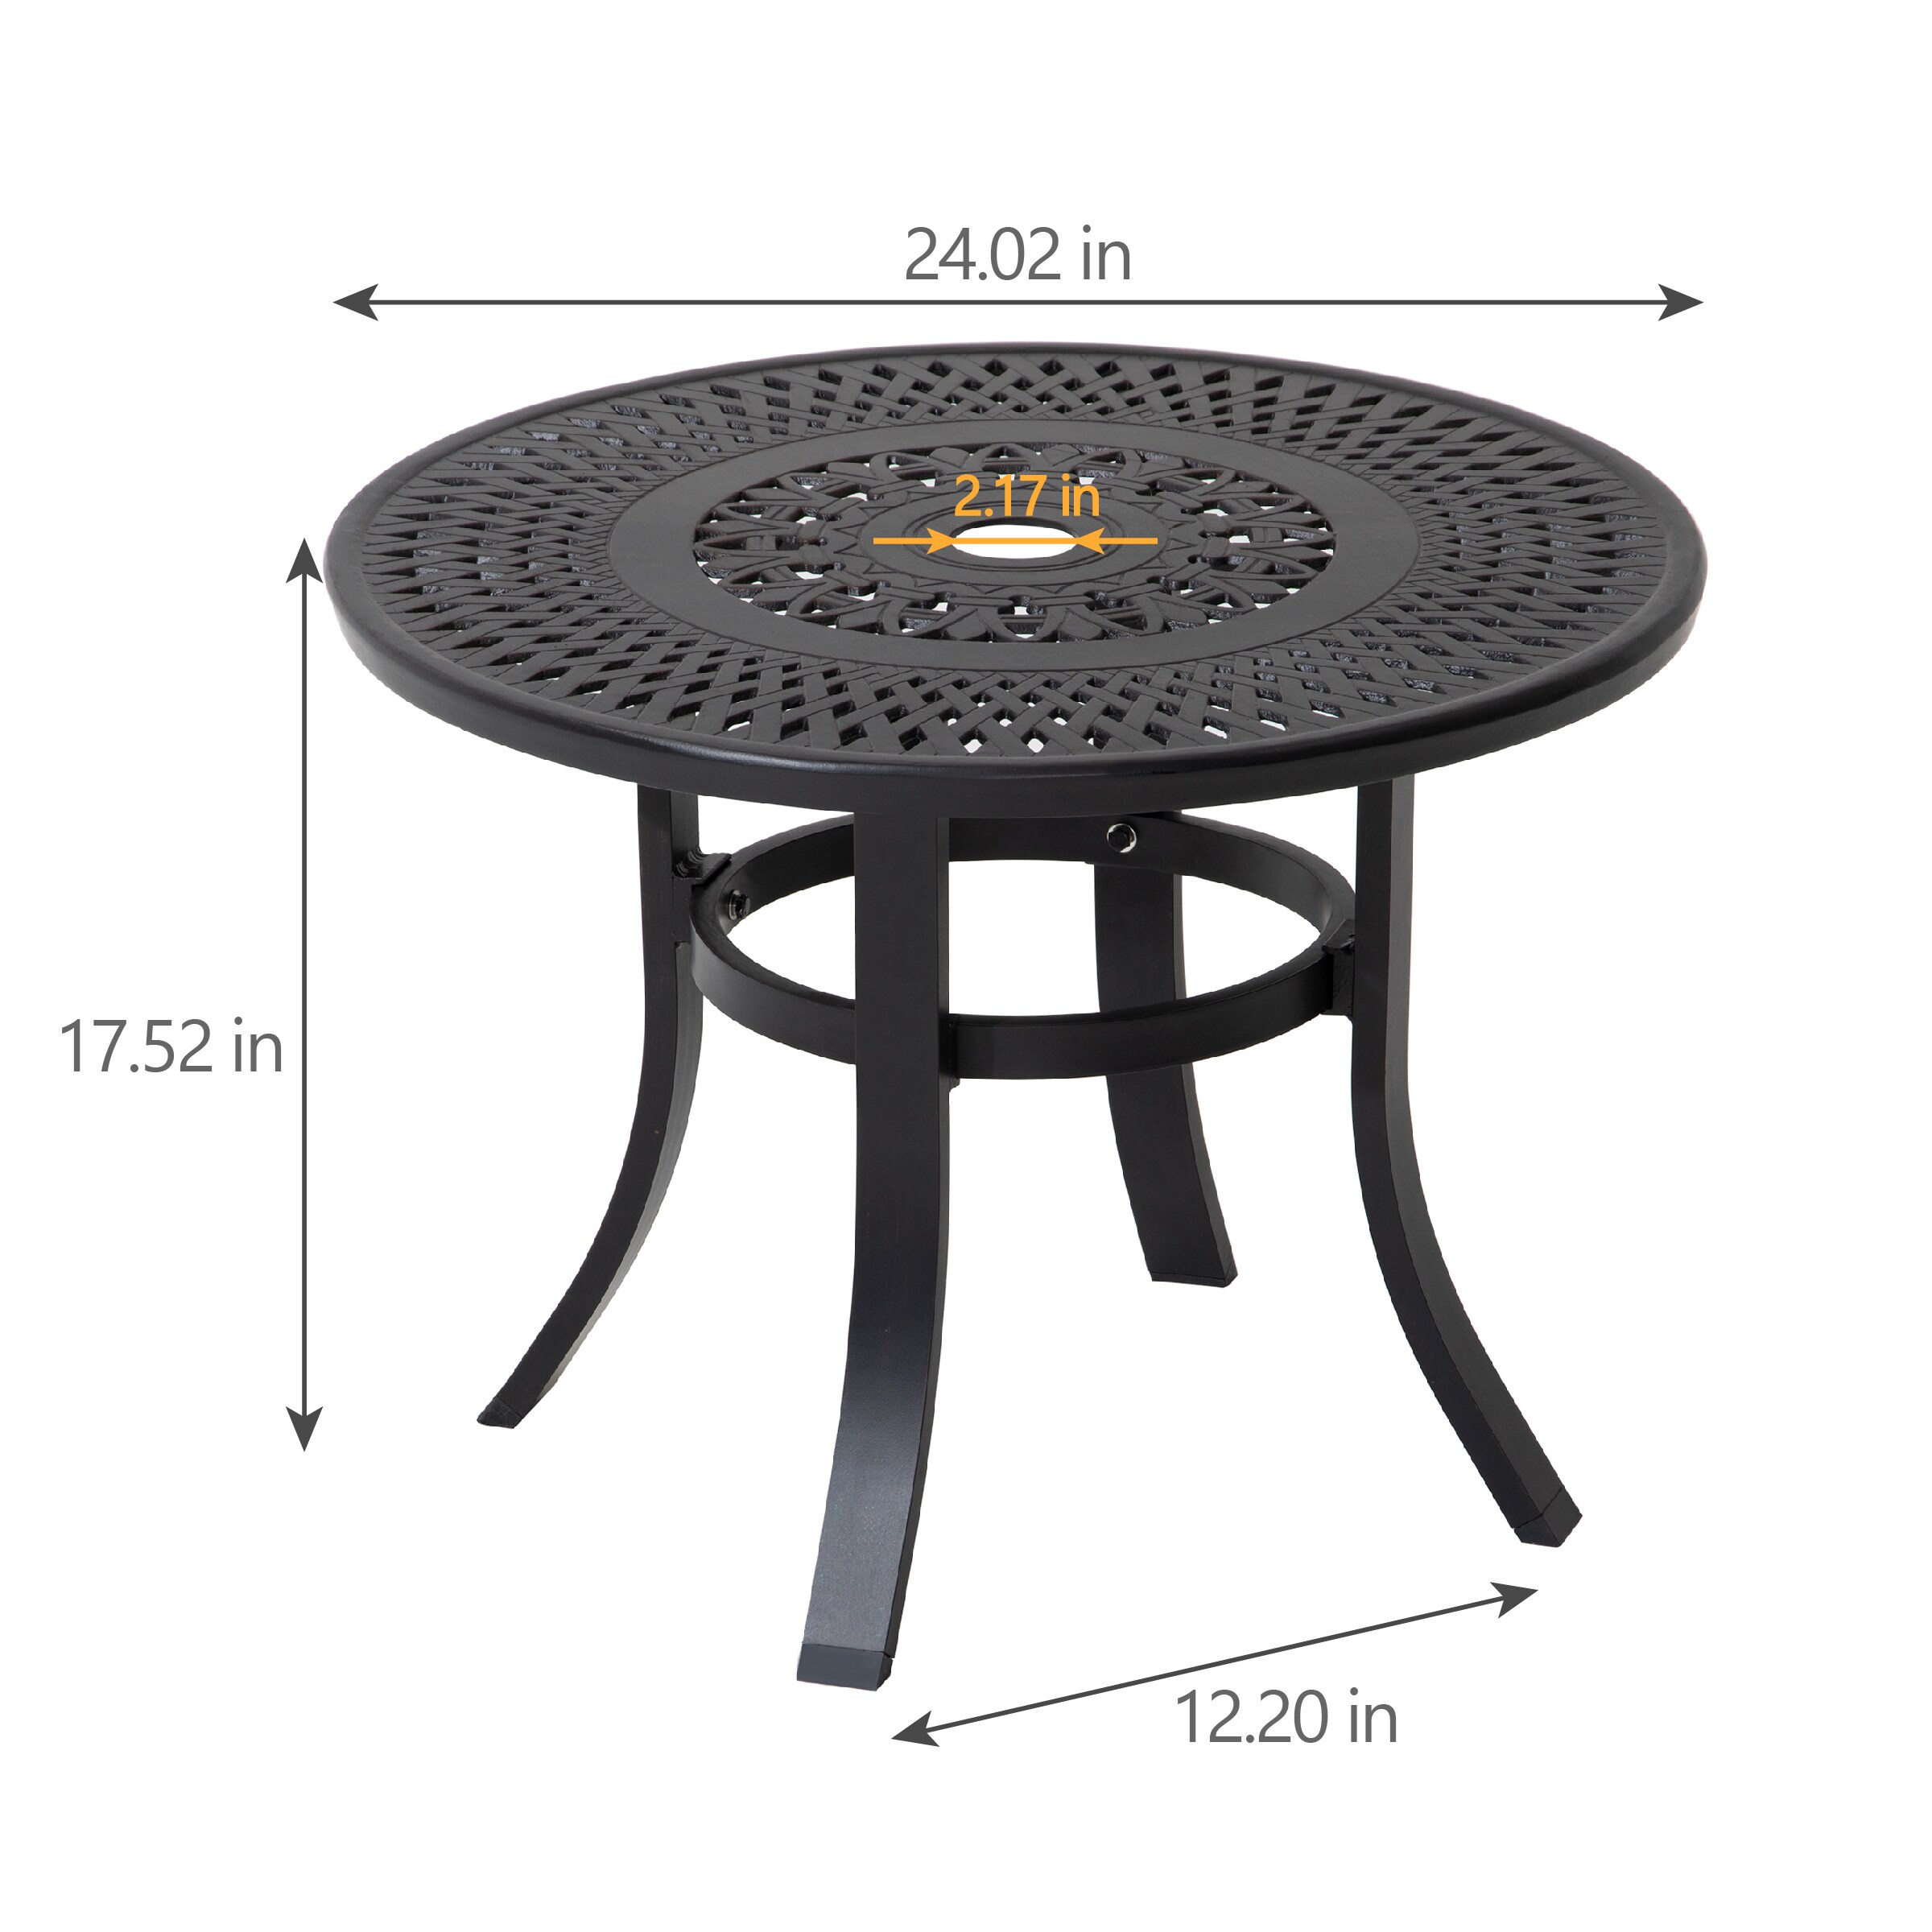 24'' round folding In-Outdoor Patio Table in black Steel Metal-umbrella hole... 